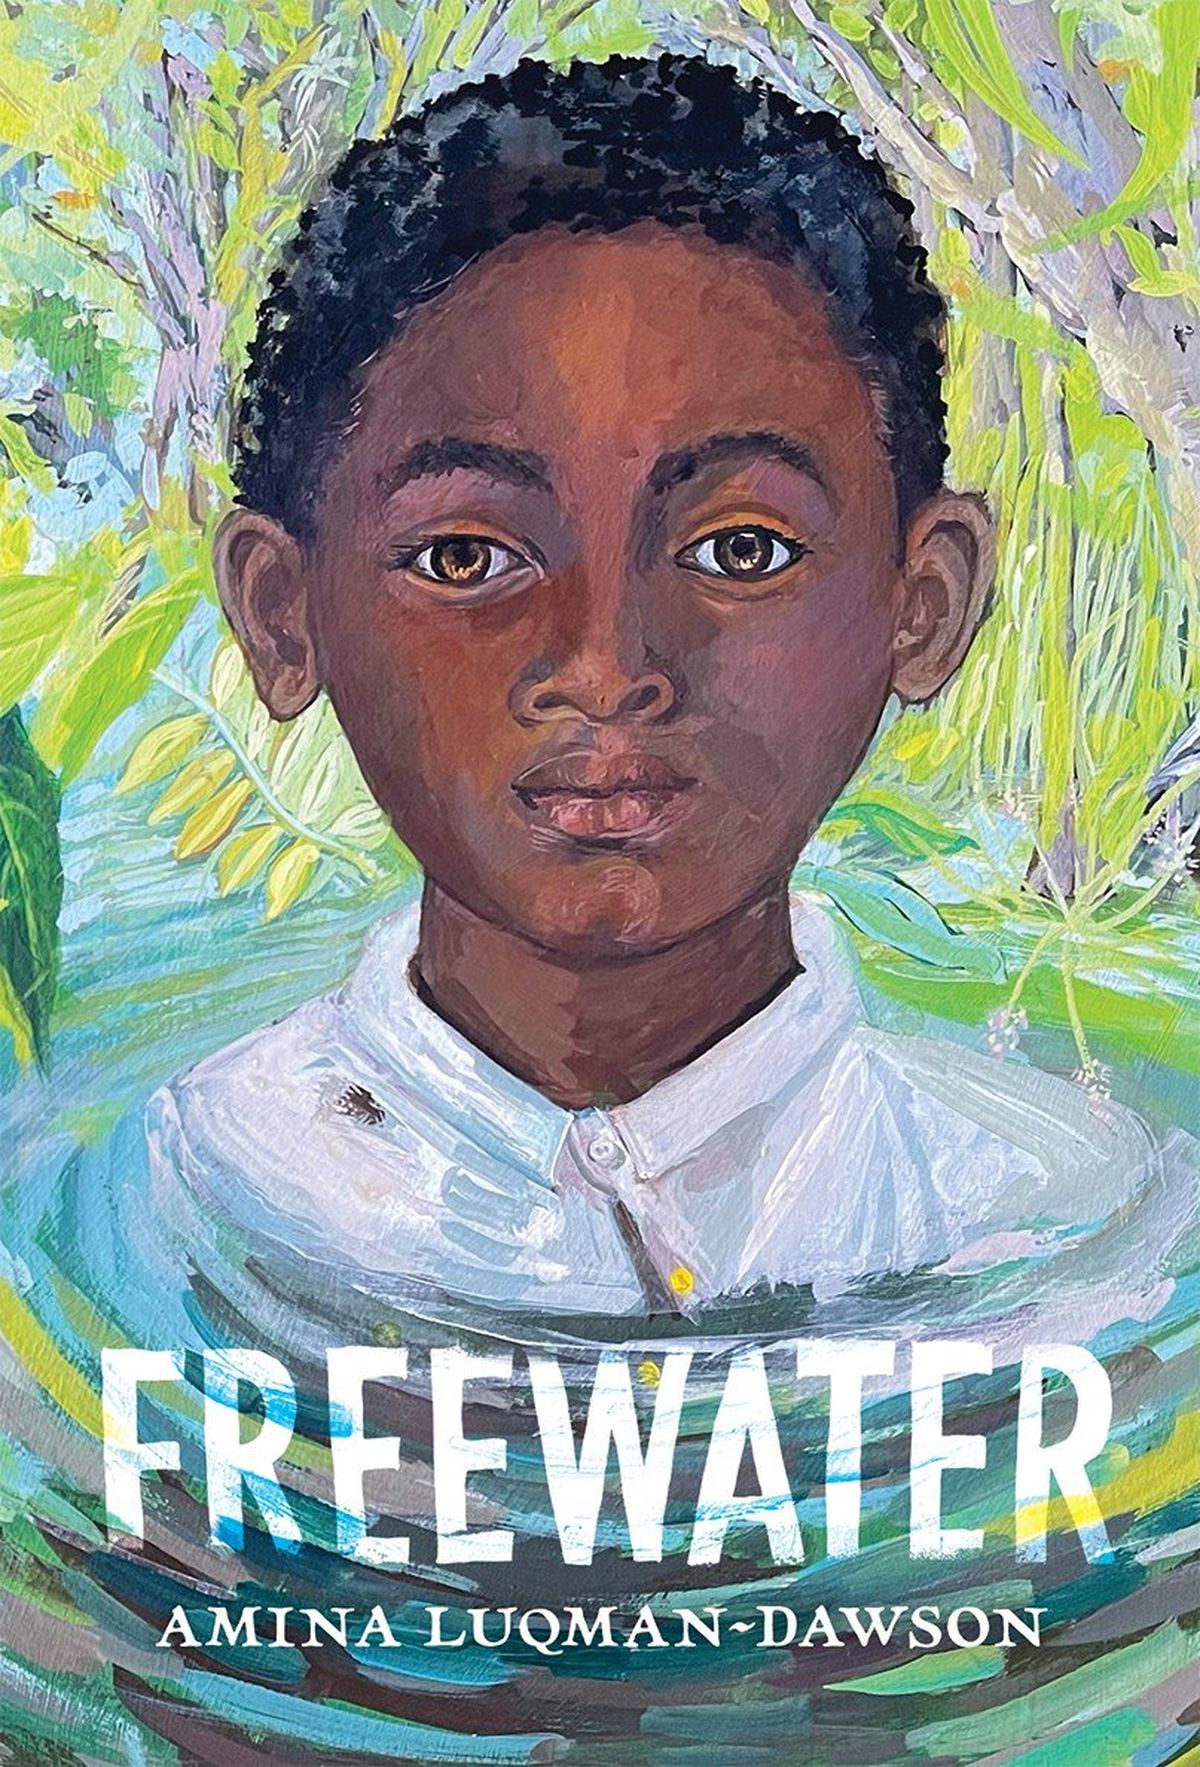 Amina Luqman-Dawson’s novel “Freewater” is set in Virginia’s Great Dismal Swamp, which provided cover for people escaping plantations.  (Little, Brown)